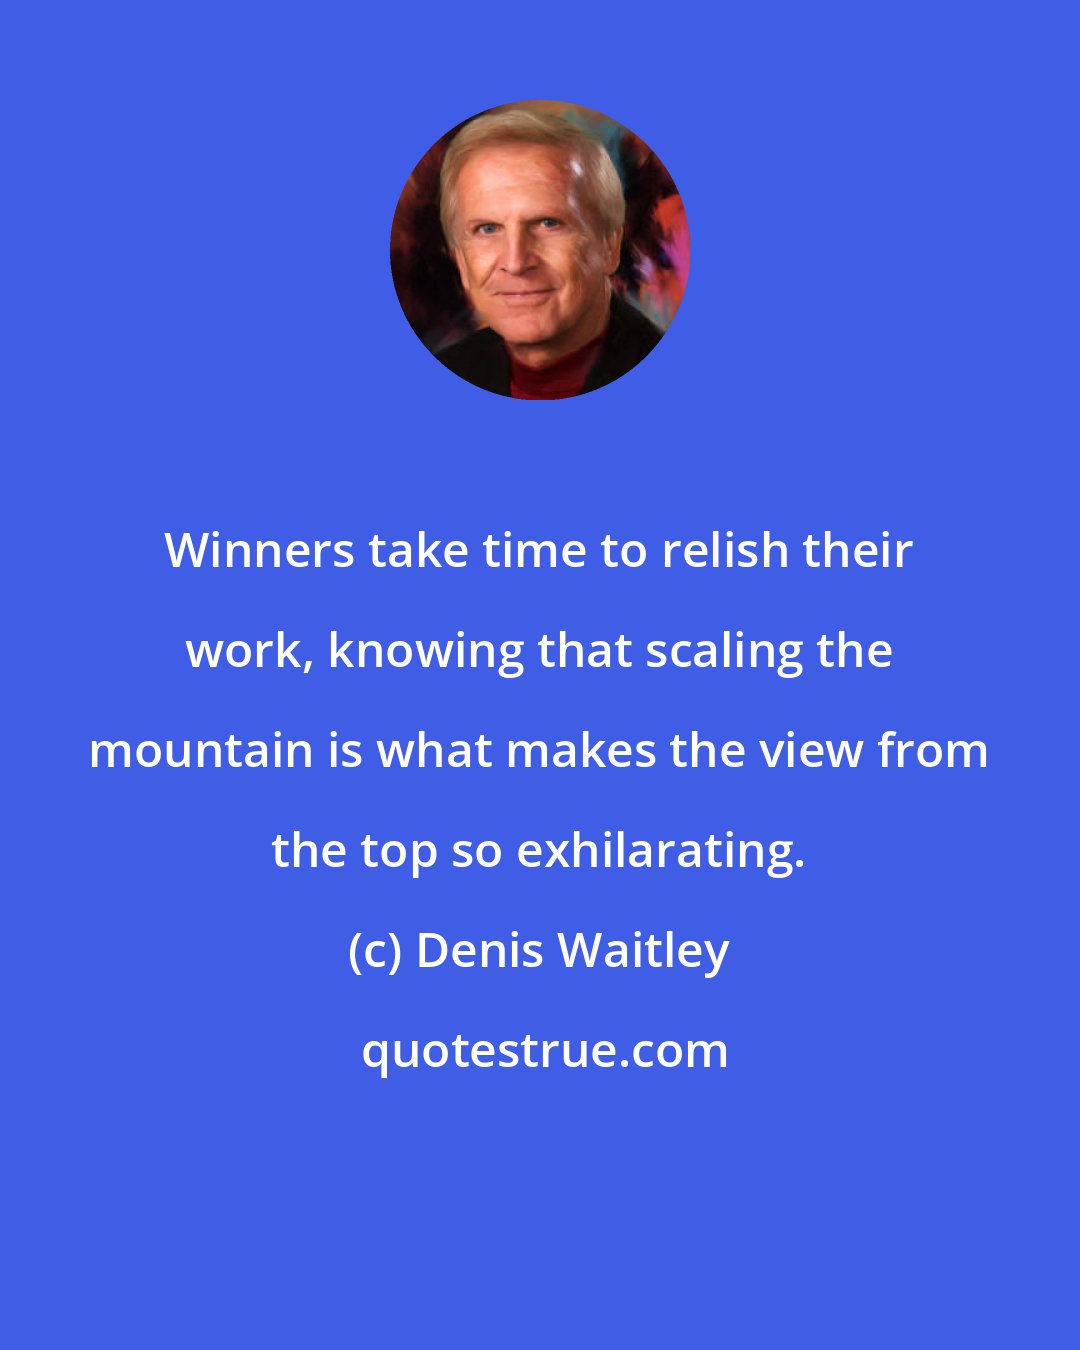 Denis Waitley: Winners take time to relish their work, knowing that scaling the mountain is what makes the view from the top so exhilarating.